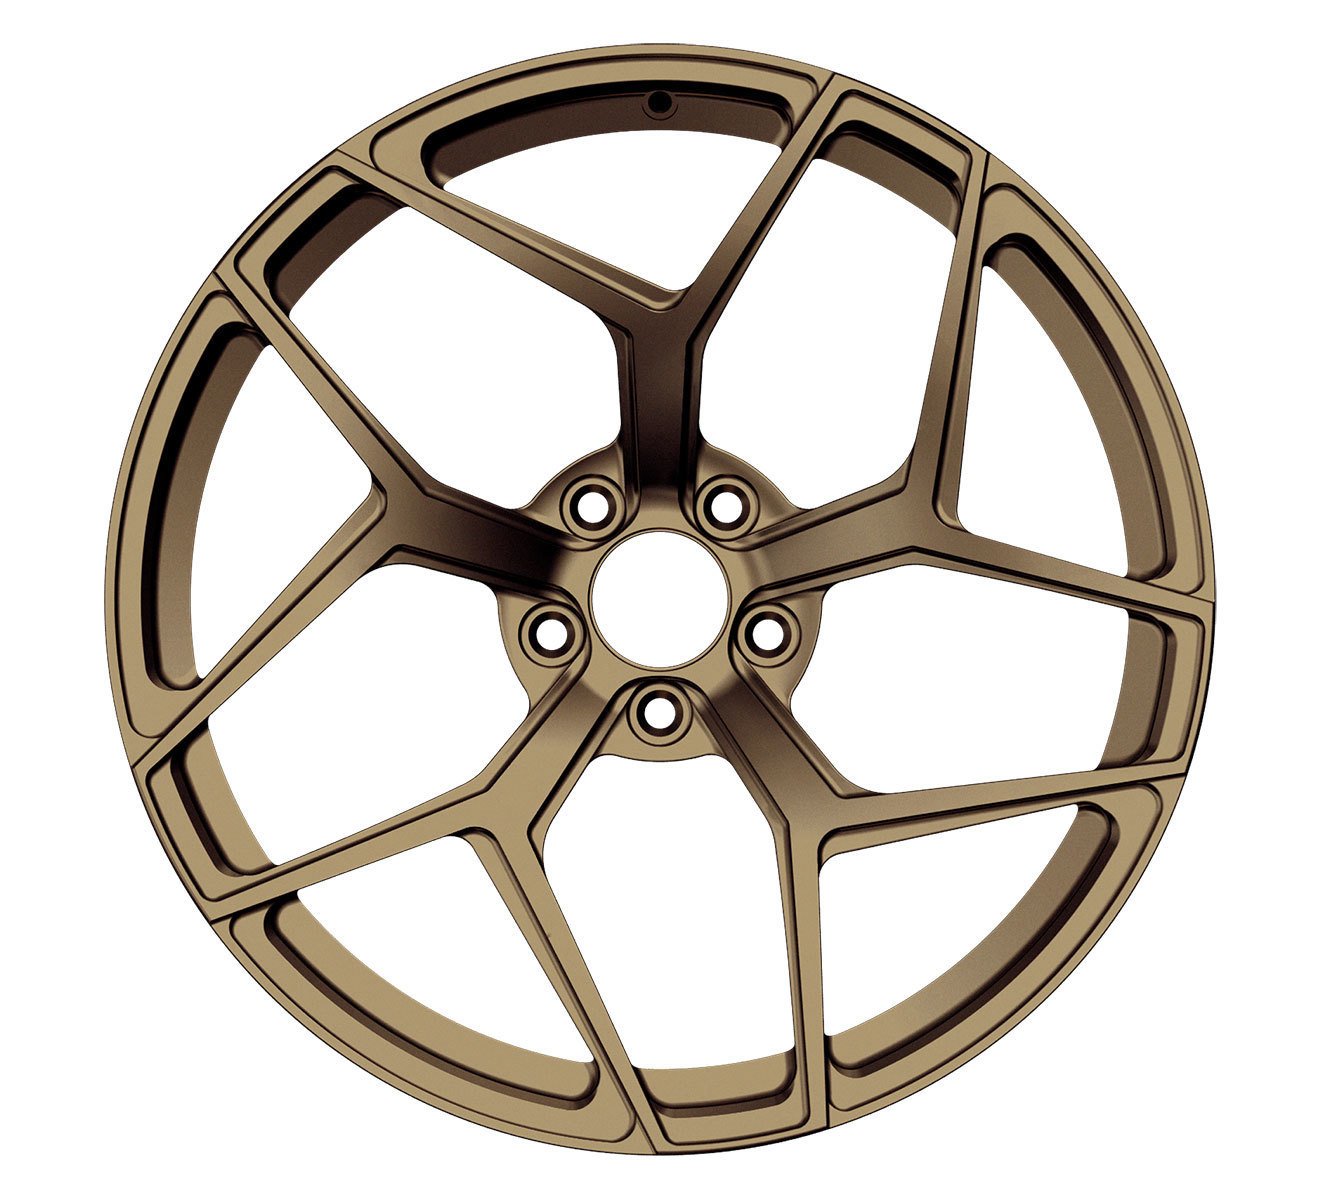 Beneventi K5S forged wheels